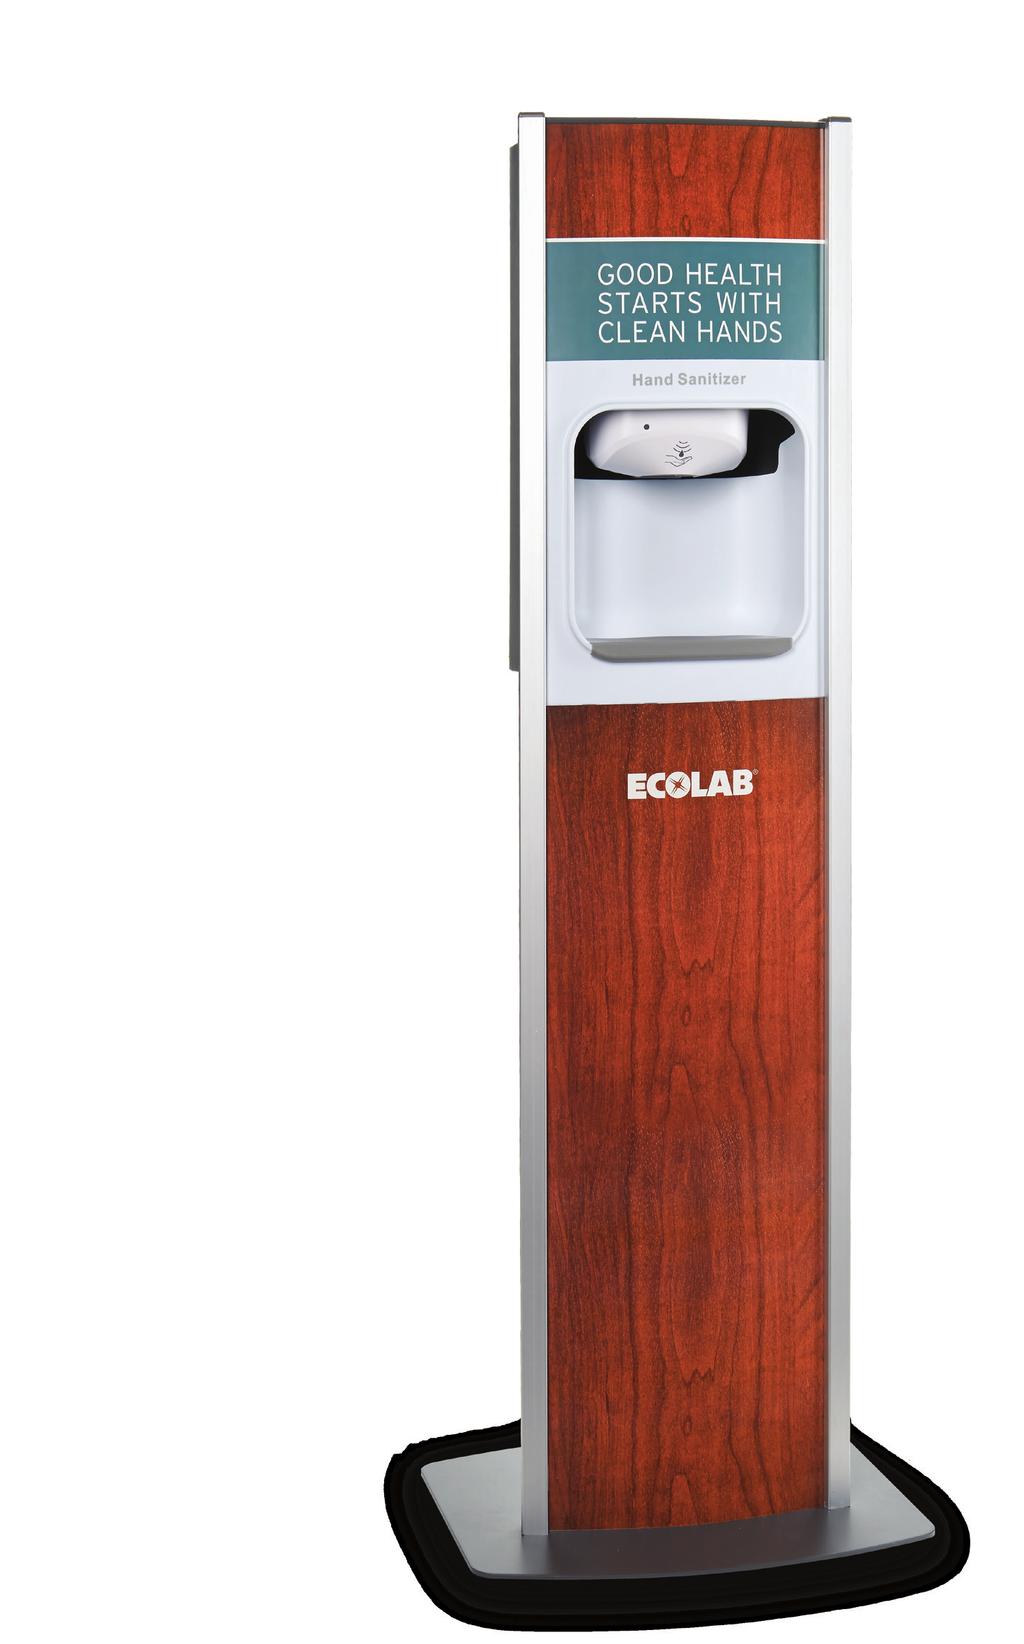 NexaTM Hand Sanitizer Stations Clean hands, wherever you need them.